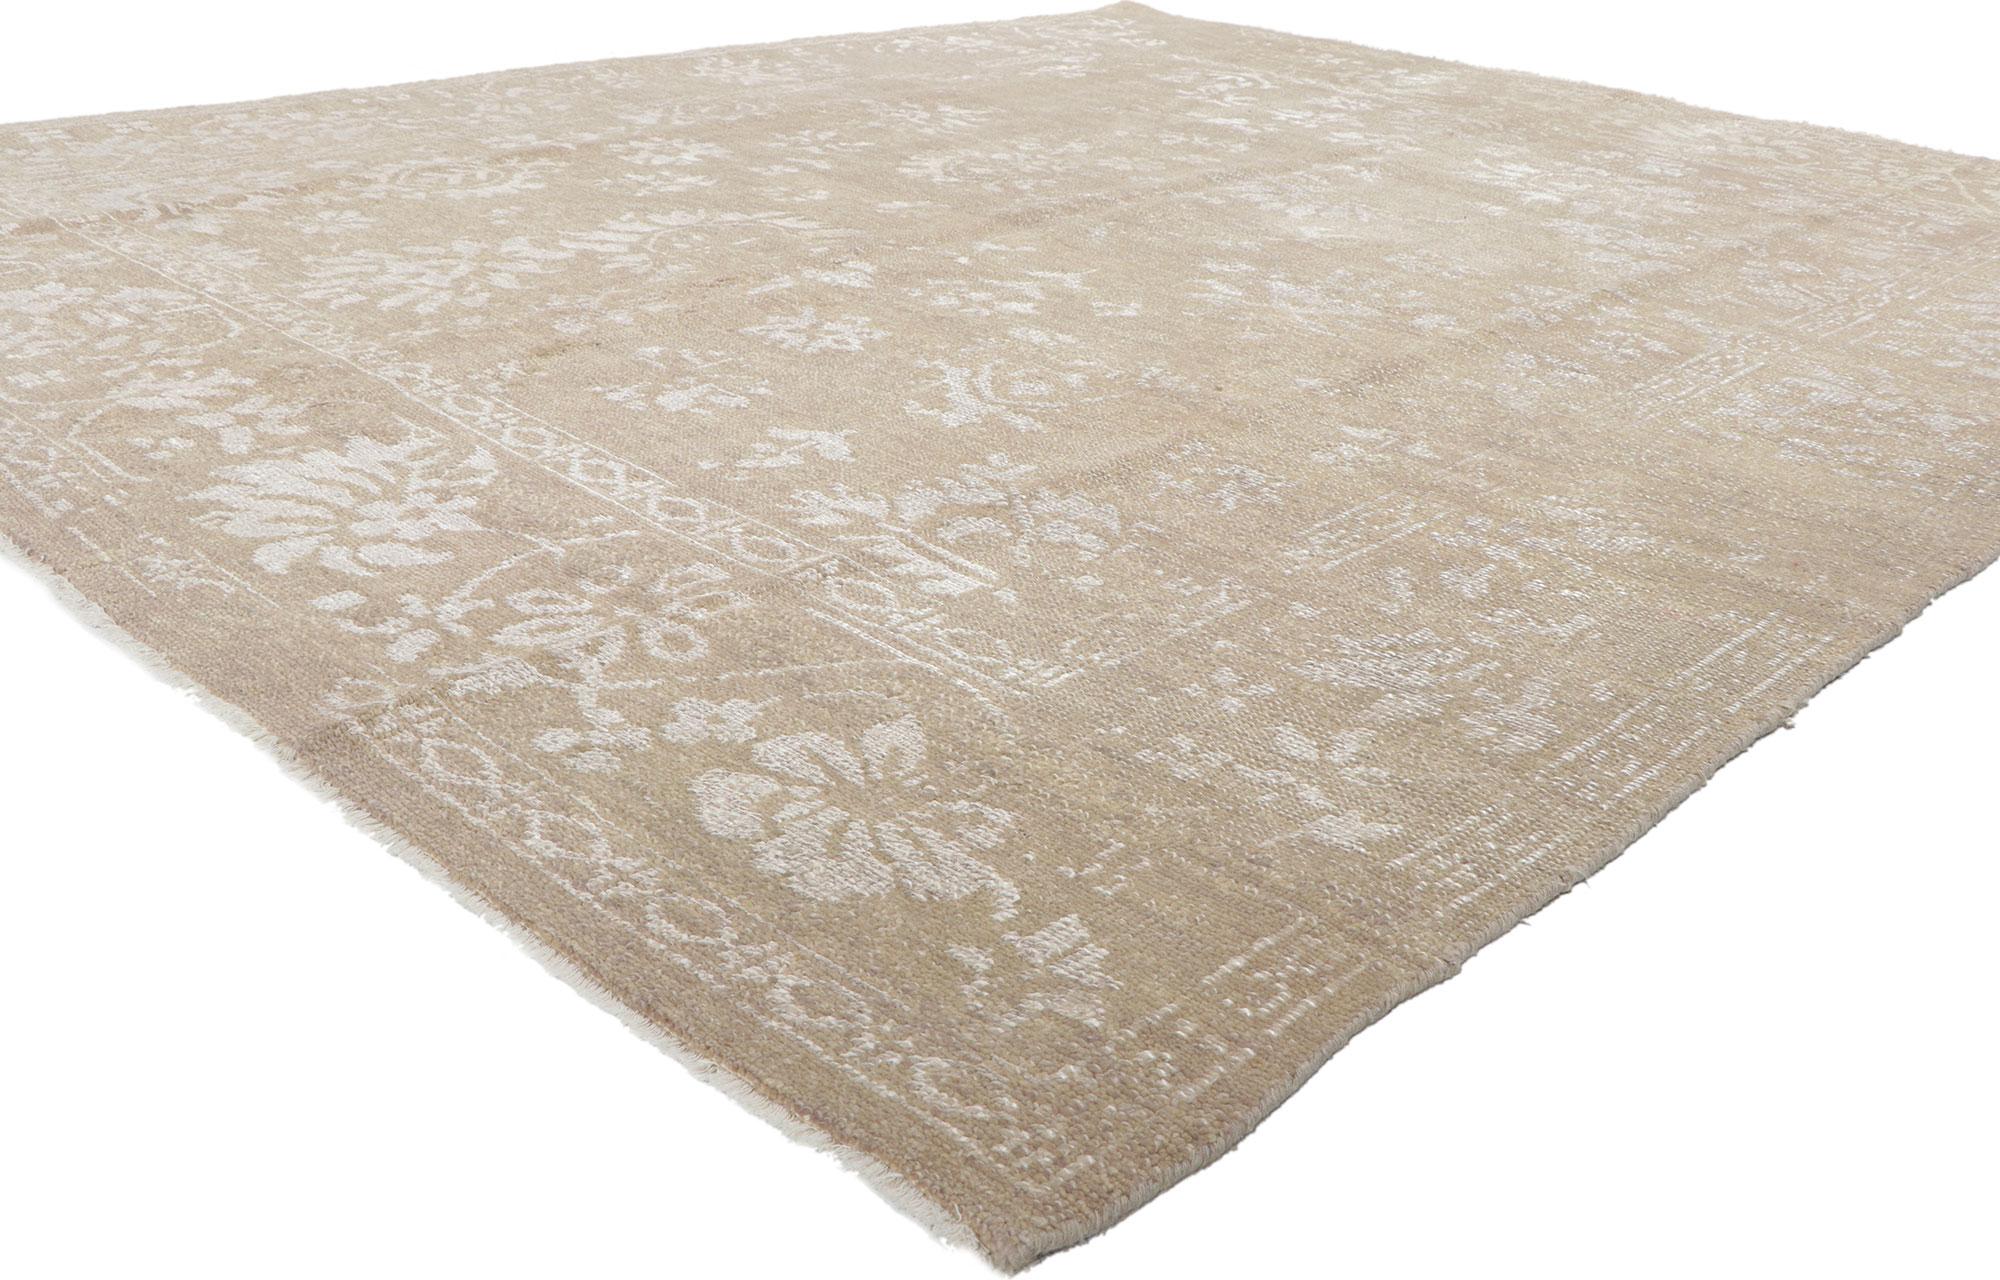 30099 New Vintage-Inspired Transitional Rug, 08'01 x 09'09.
Emanating vintage charm with incredible detail and texture, this hand knotted transitional area rug is a captivating vision of woven beauty. The faded allover pattern and soft earth-tone